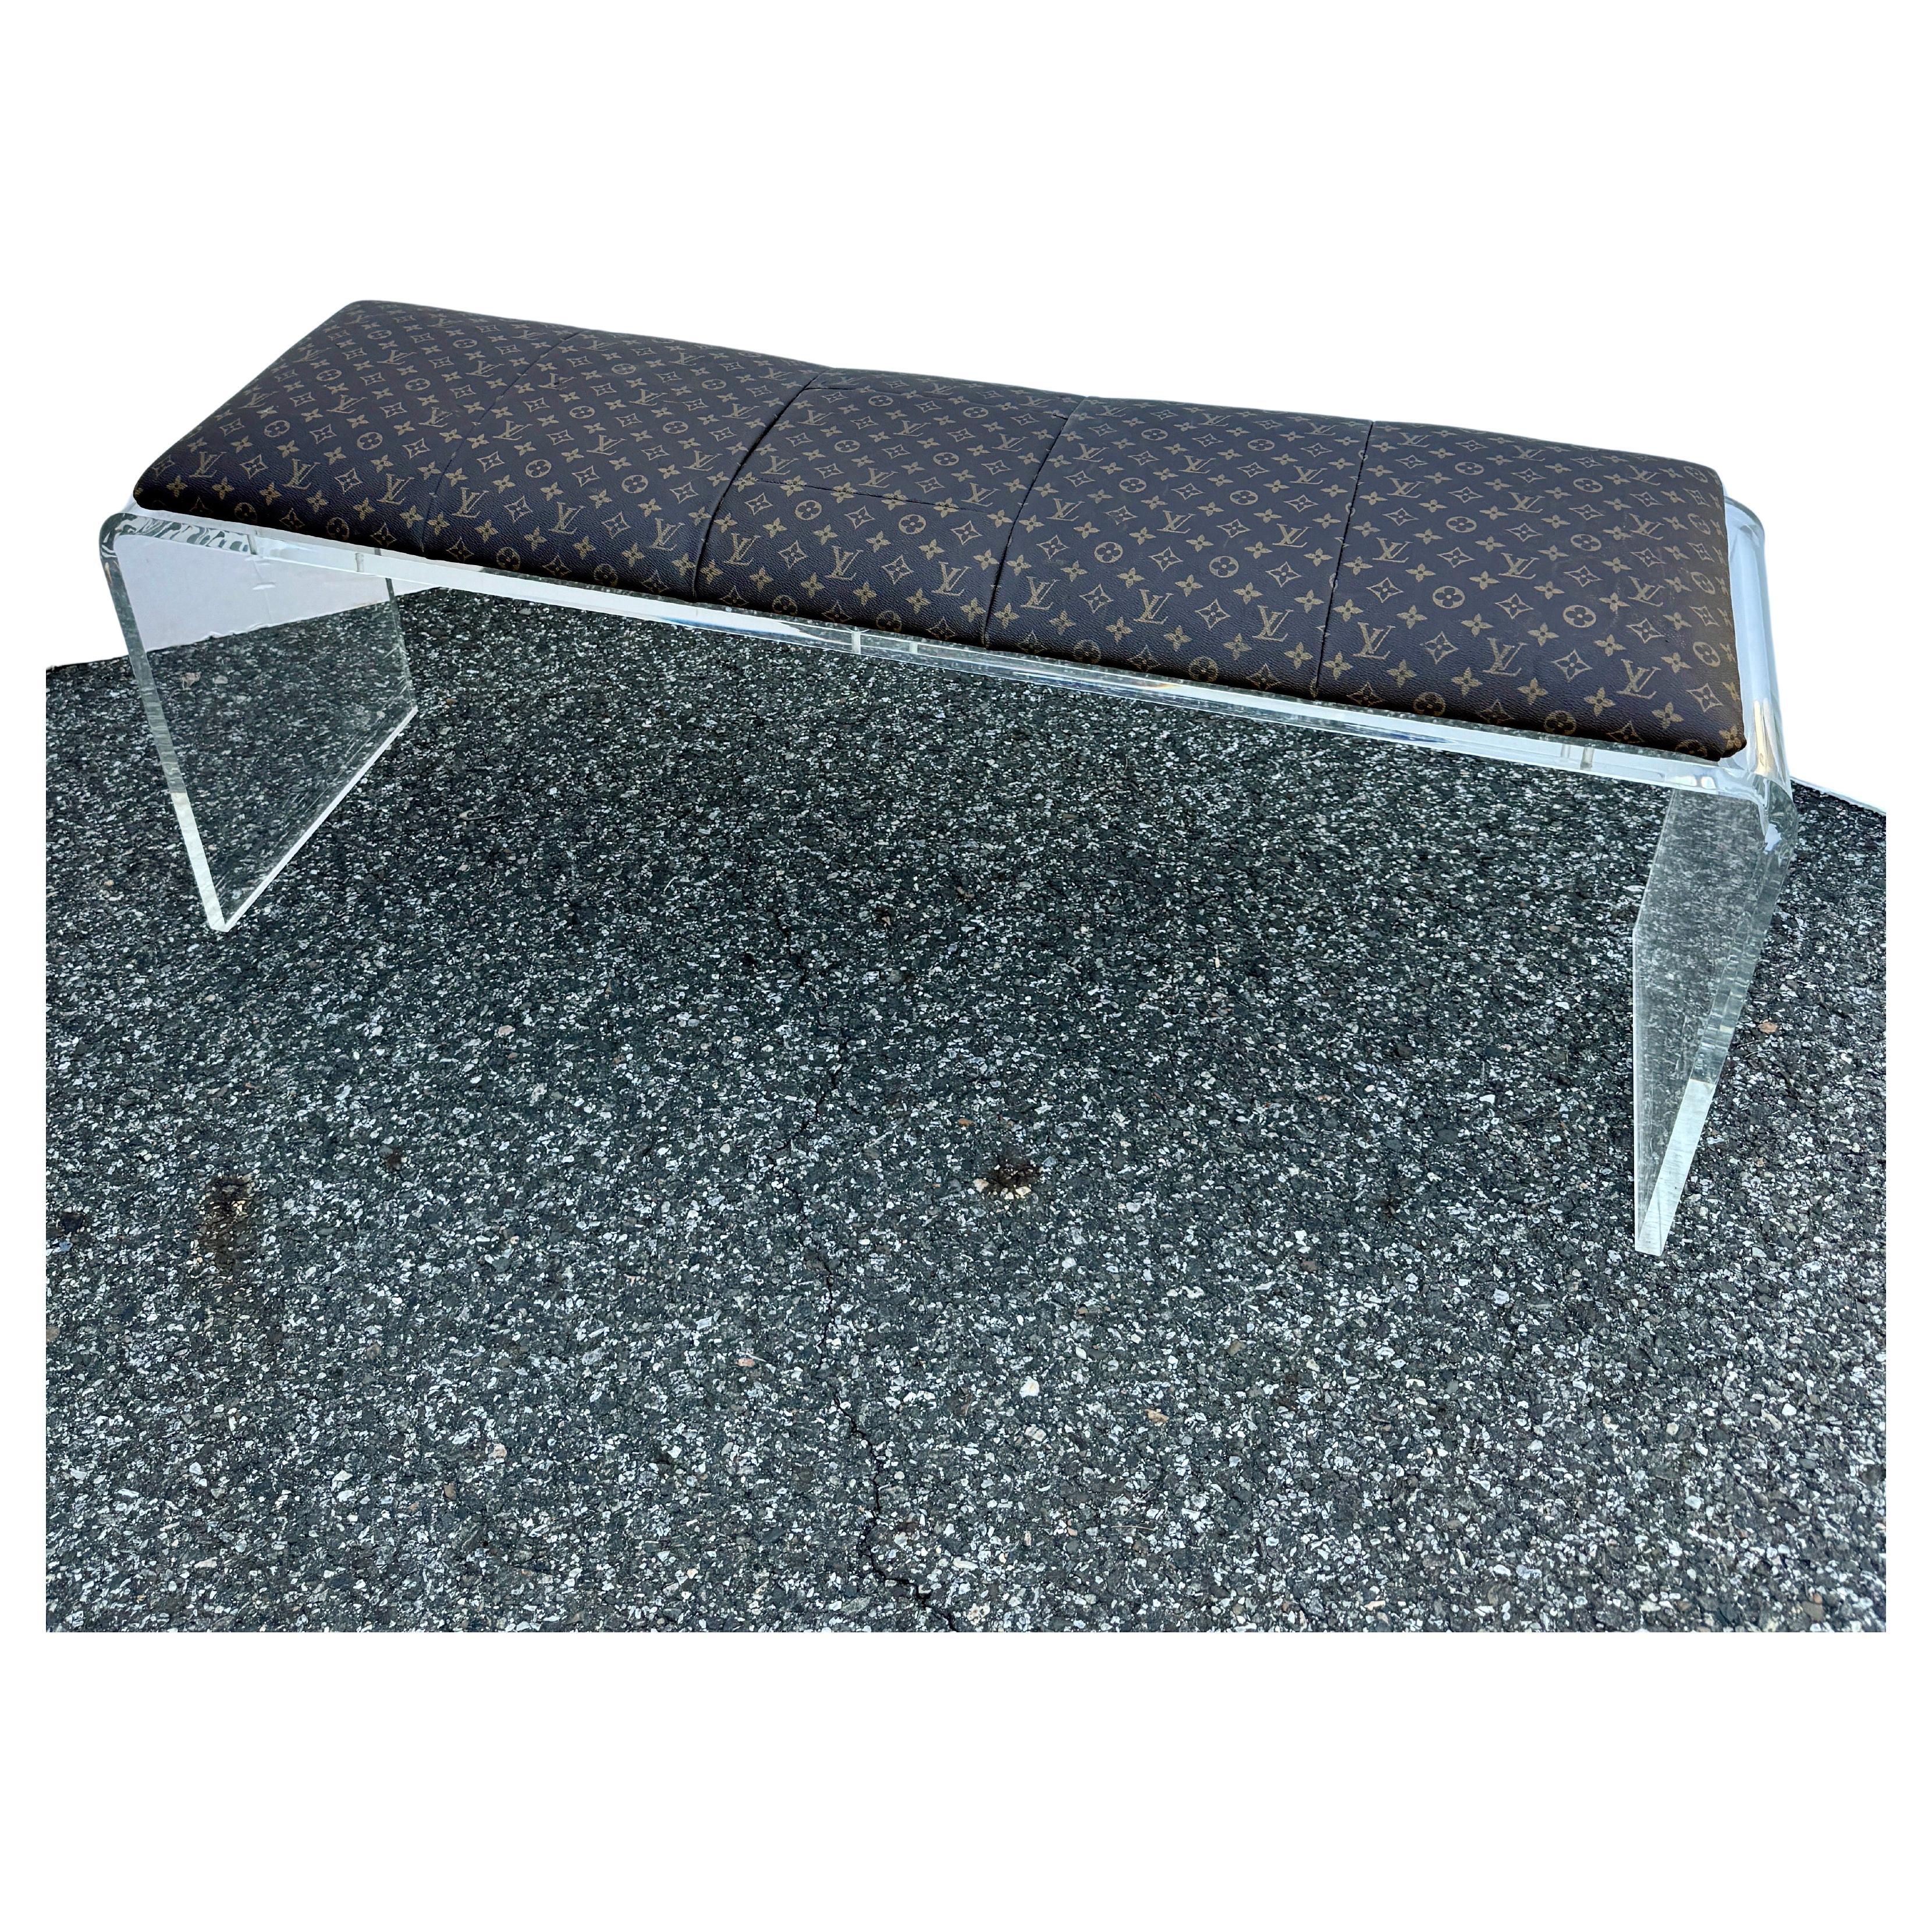 Design and purpose best describe this one-of-a-kind custom bench. This piece features an authentic classic Monogram Louis Vuitton fabric seat atop a very sturdy lucite bench. This seating was well thought out and then executed by a professional